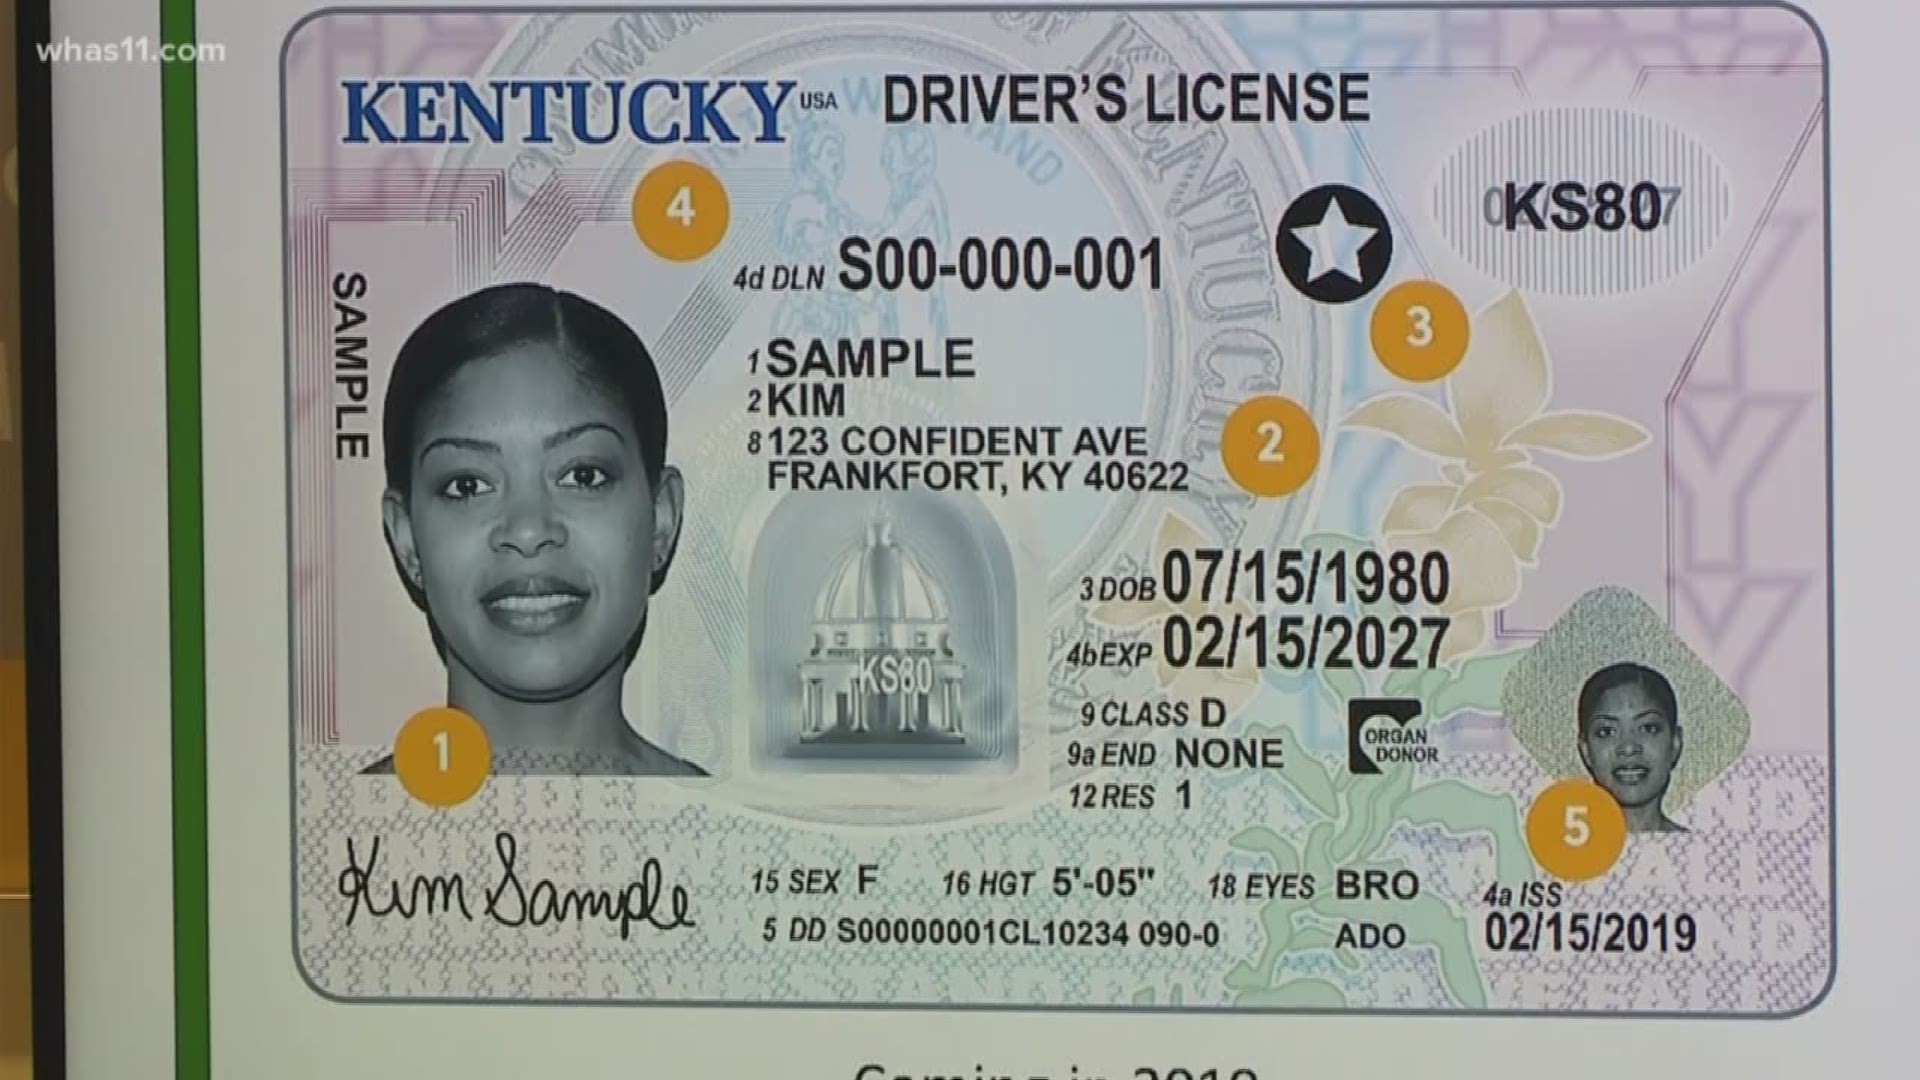 Kentucky is beginning to roll out new voluntary travel IDs in compliance with federal law. Jefferson County's tentative roll-out begins March 19-22.